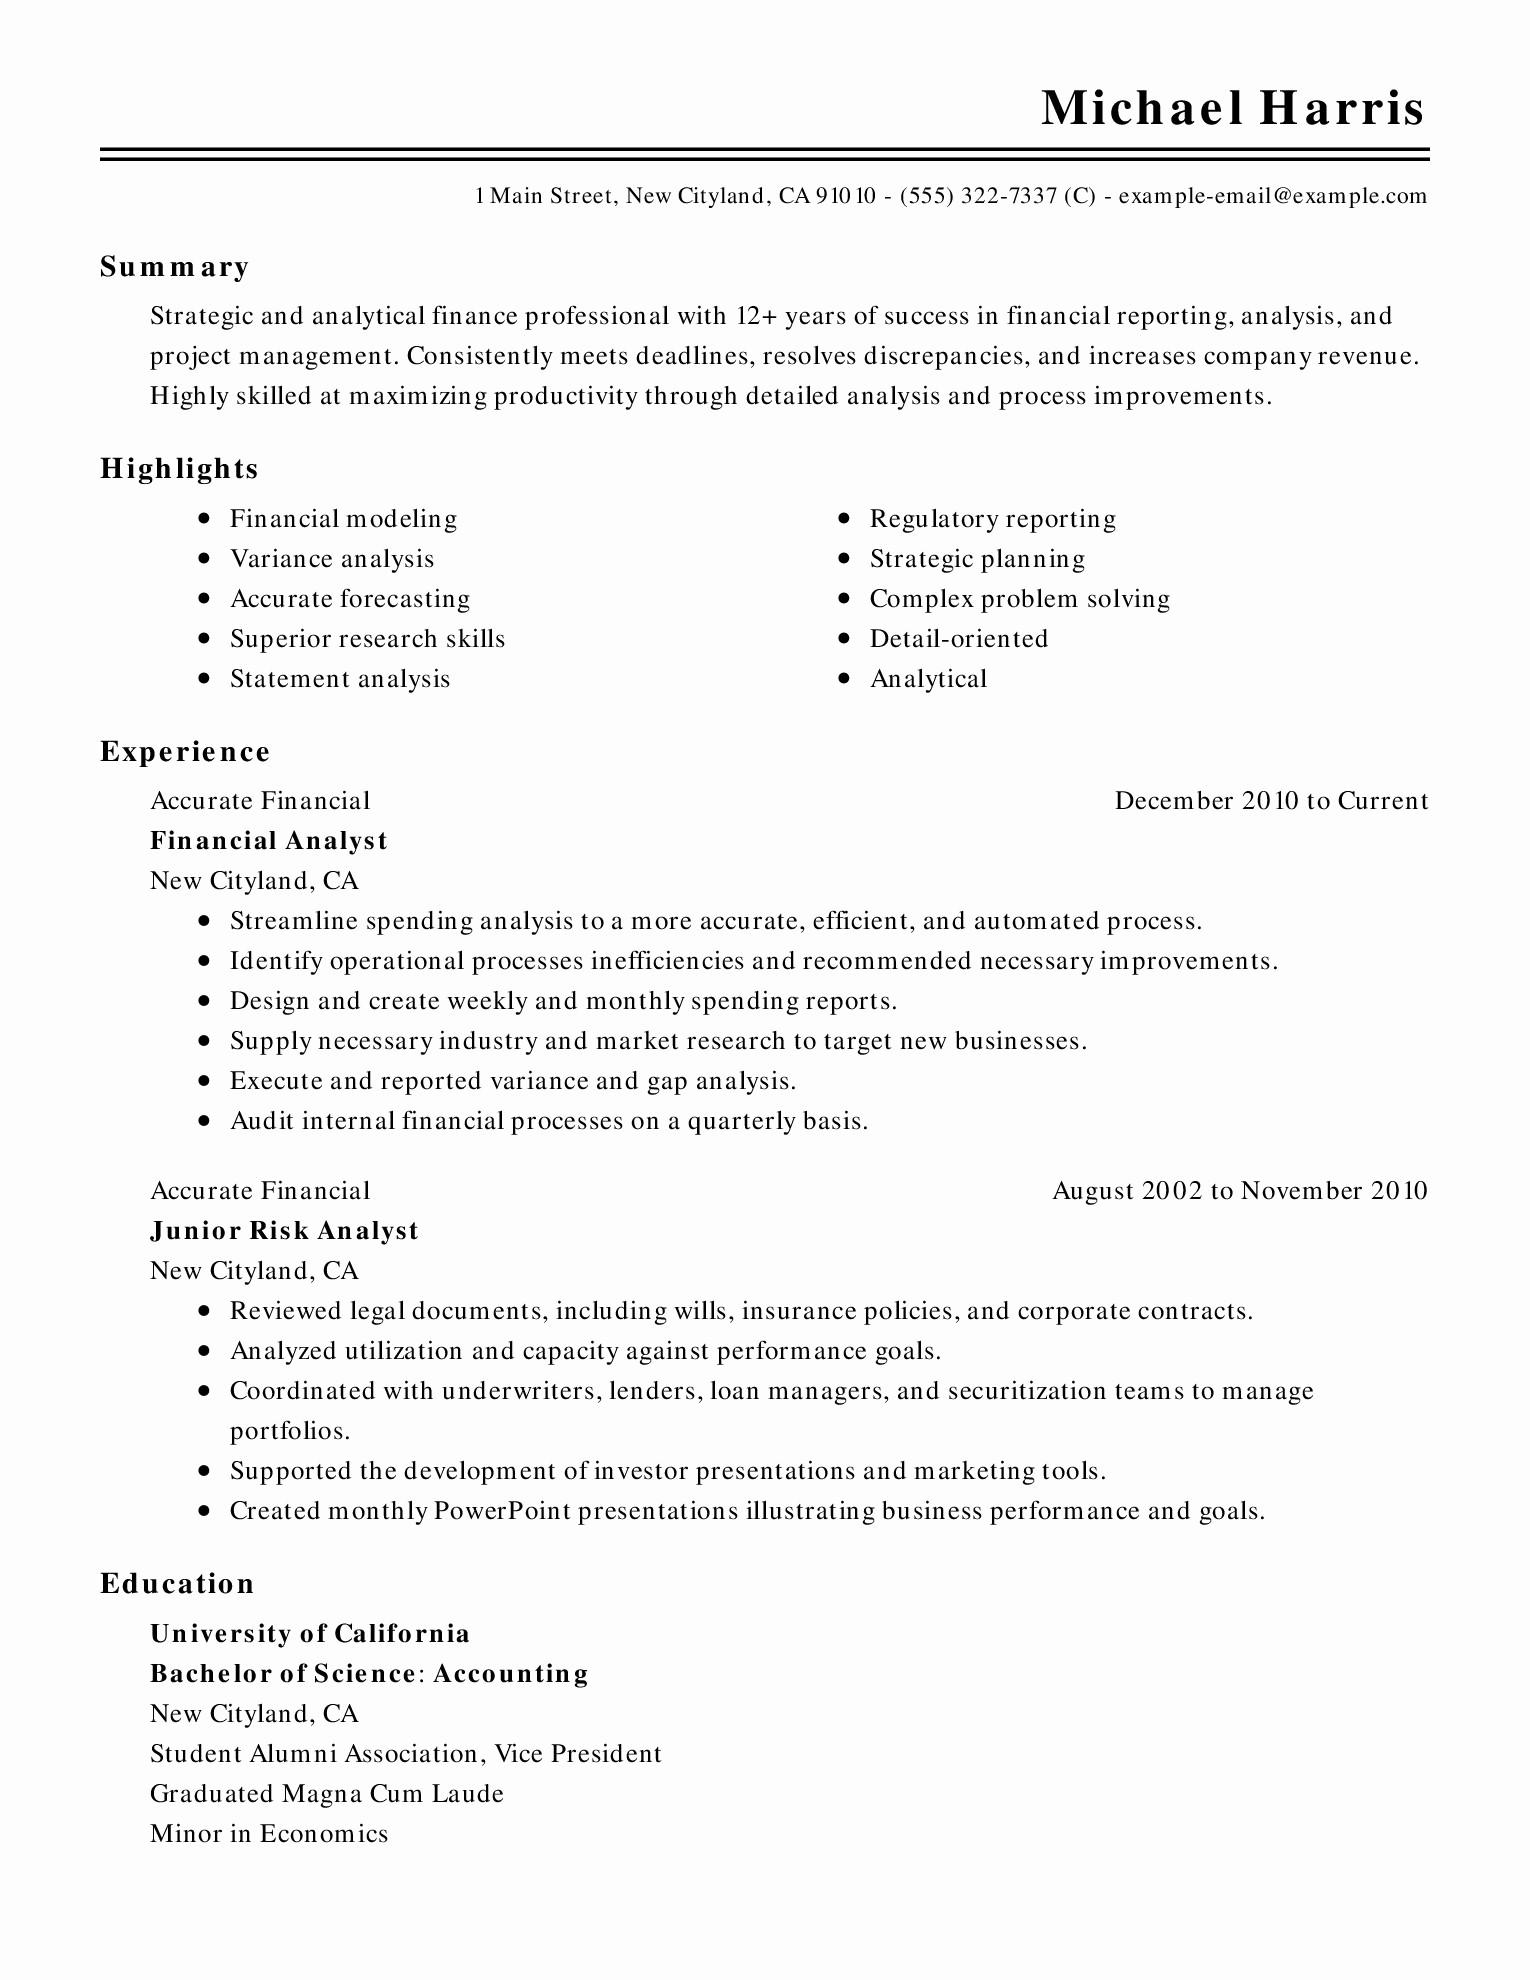 Resume Templates On Microsoft Word Awesome Accounting and Finance Resume Template for Microsoft Word